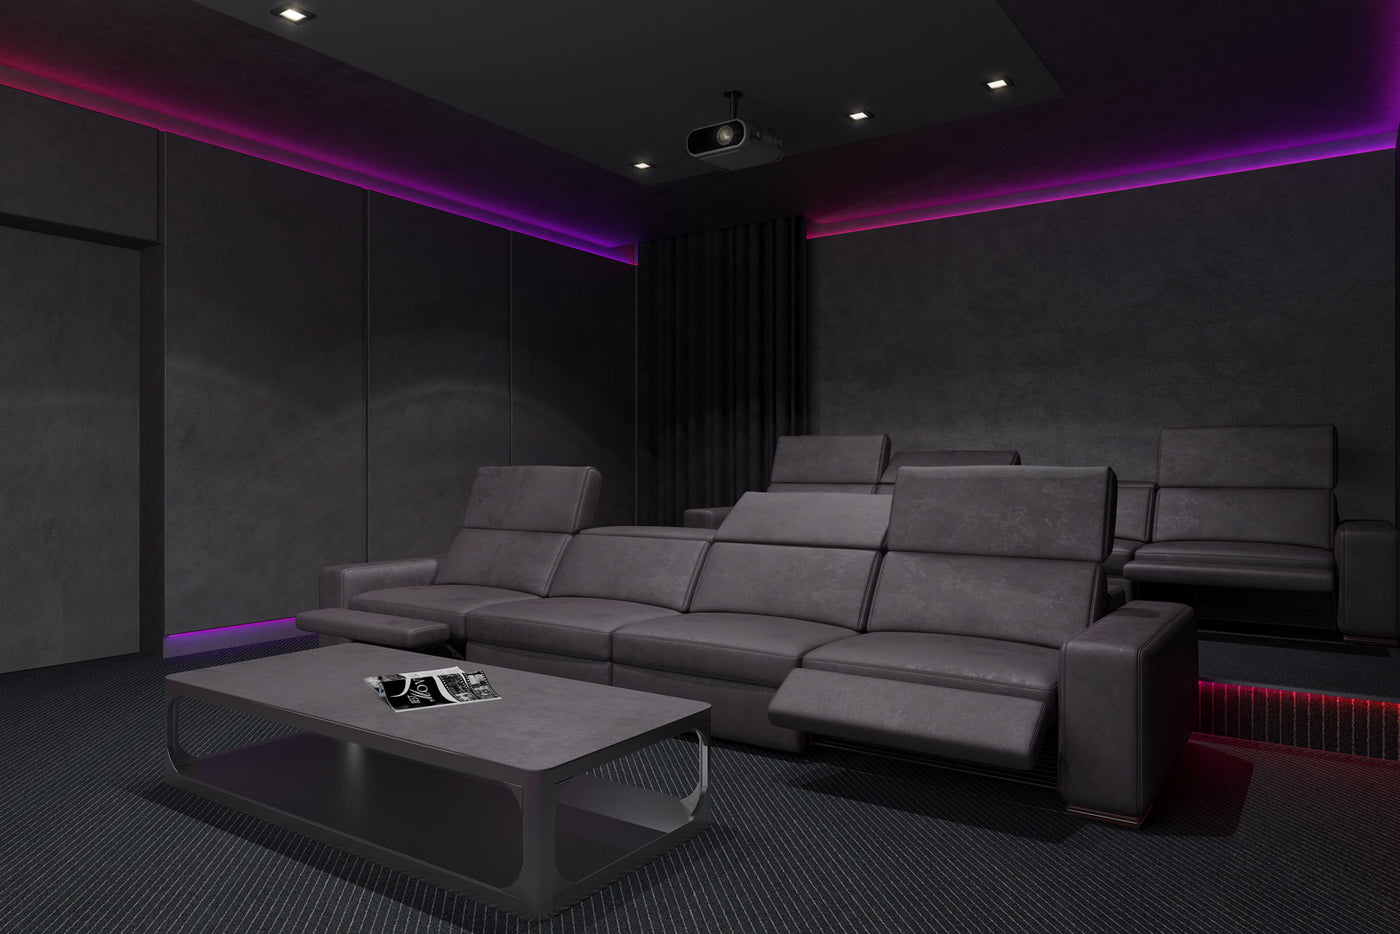 Future predictions for the home theatre and consumer AV industry